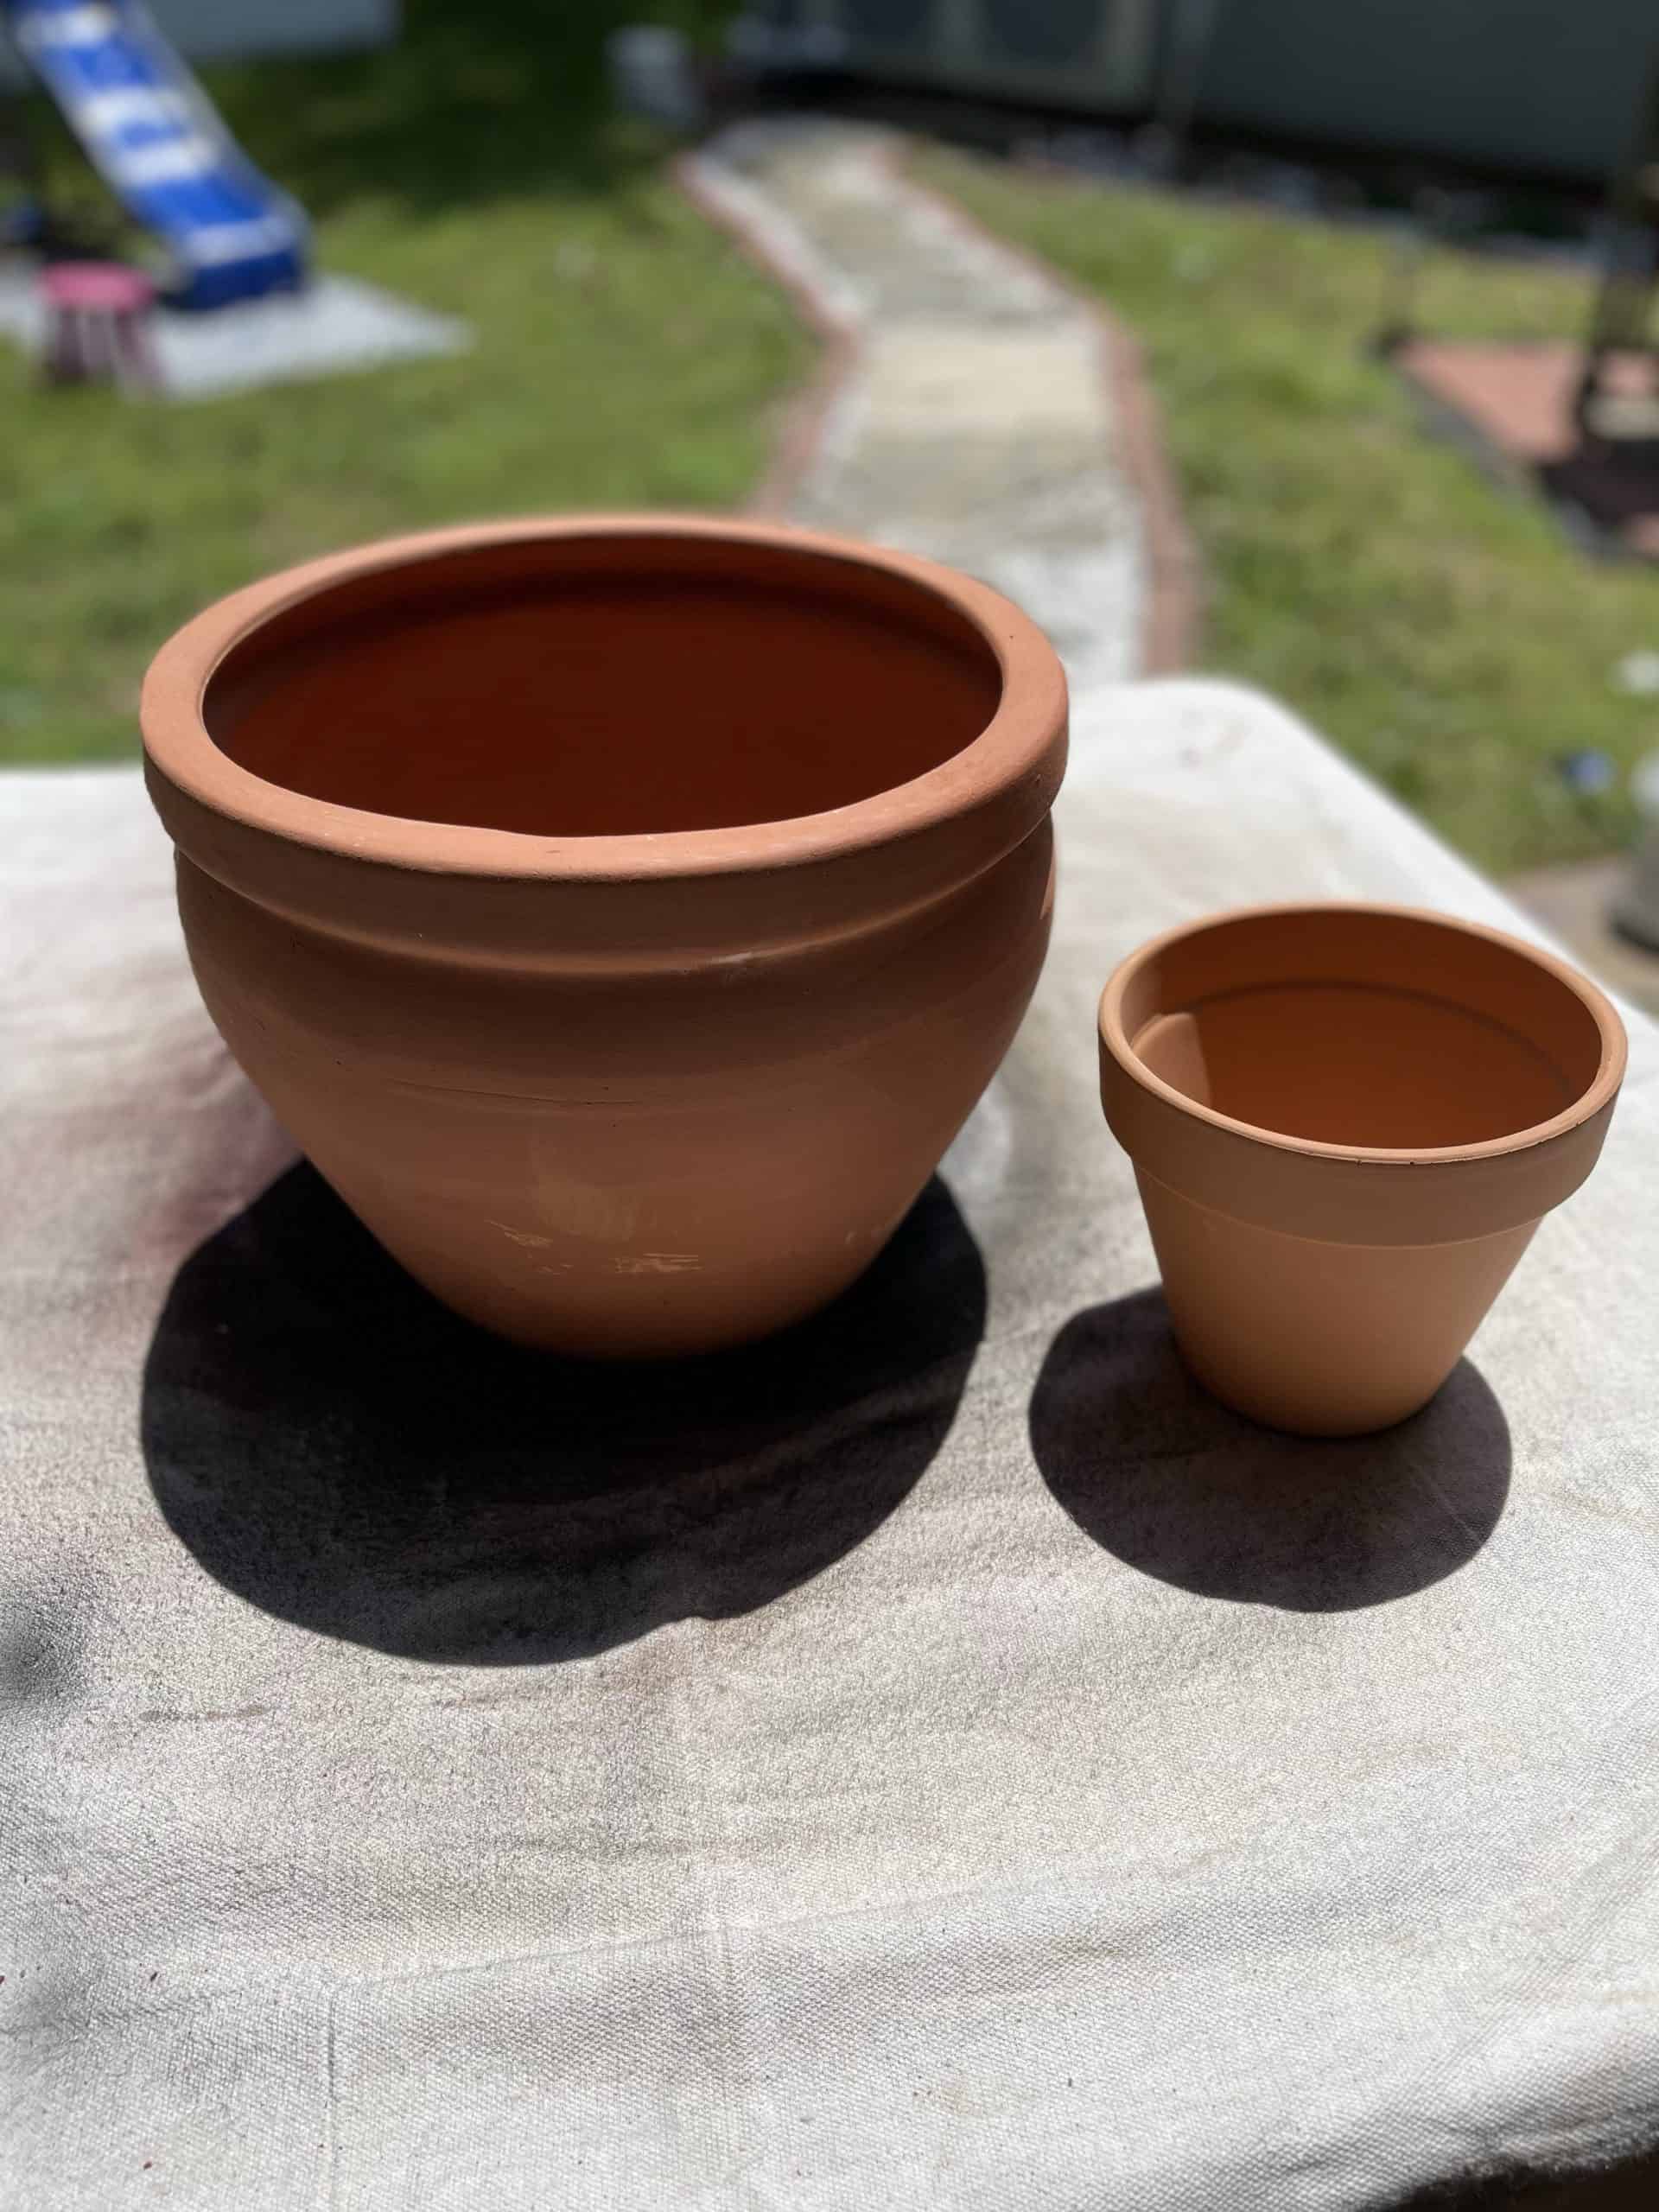 Terra Cotta pots, one large and one medium